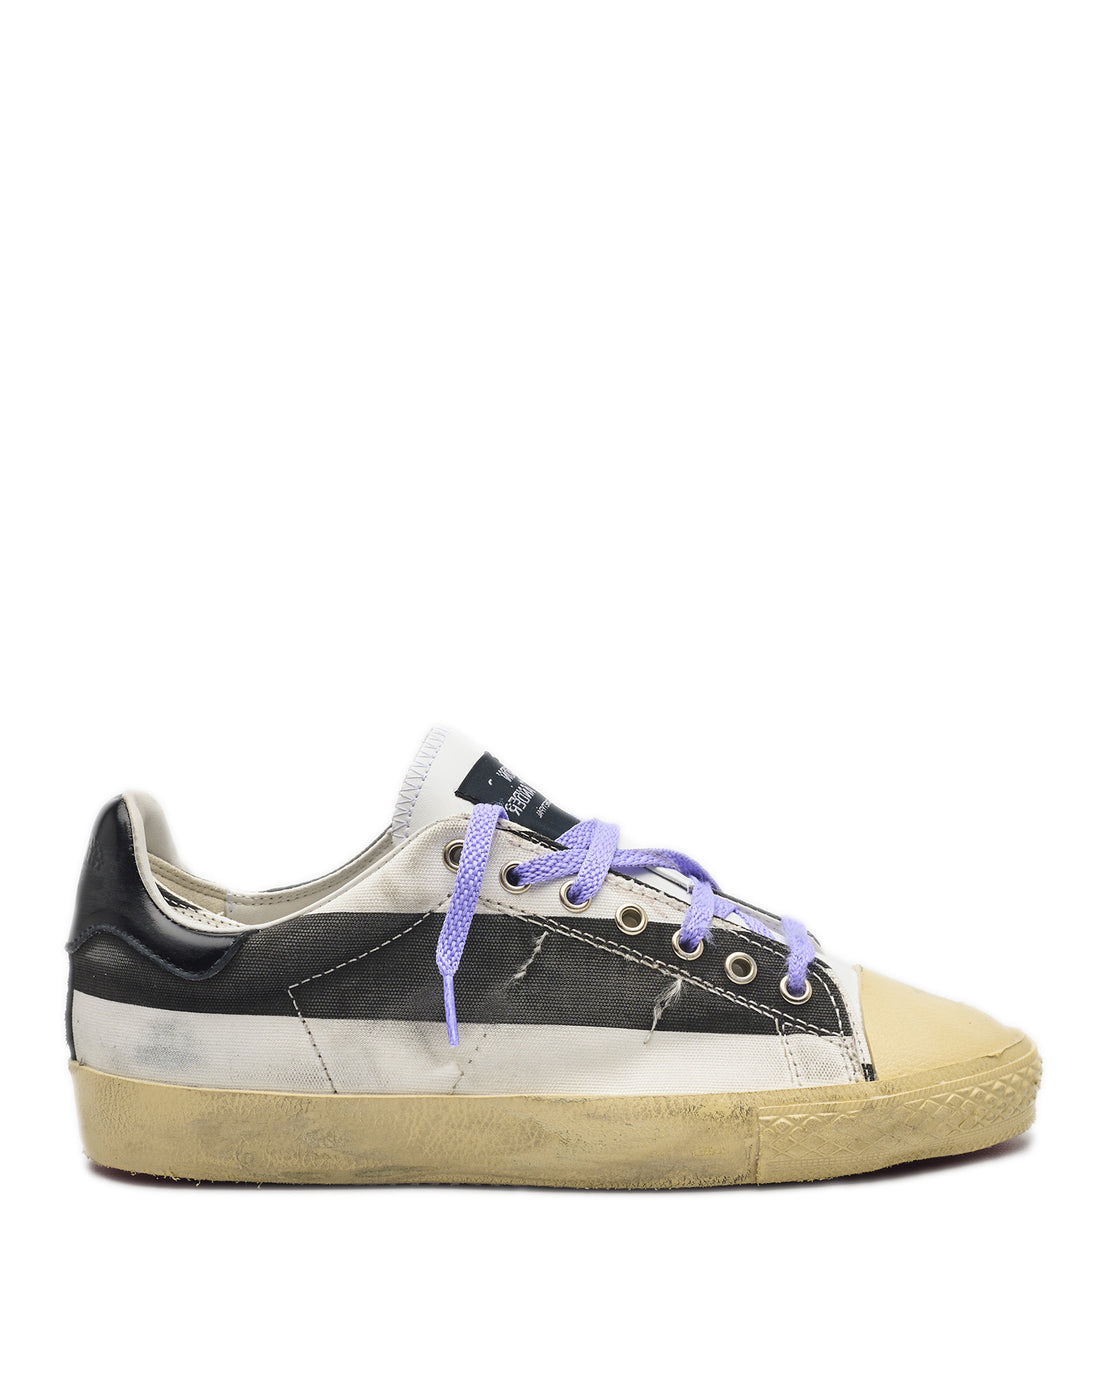 HIDNANDER Sneakers Starless Low a Righe Bianco/Nero